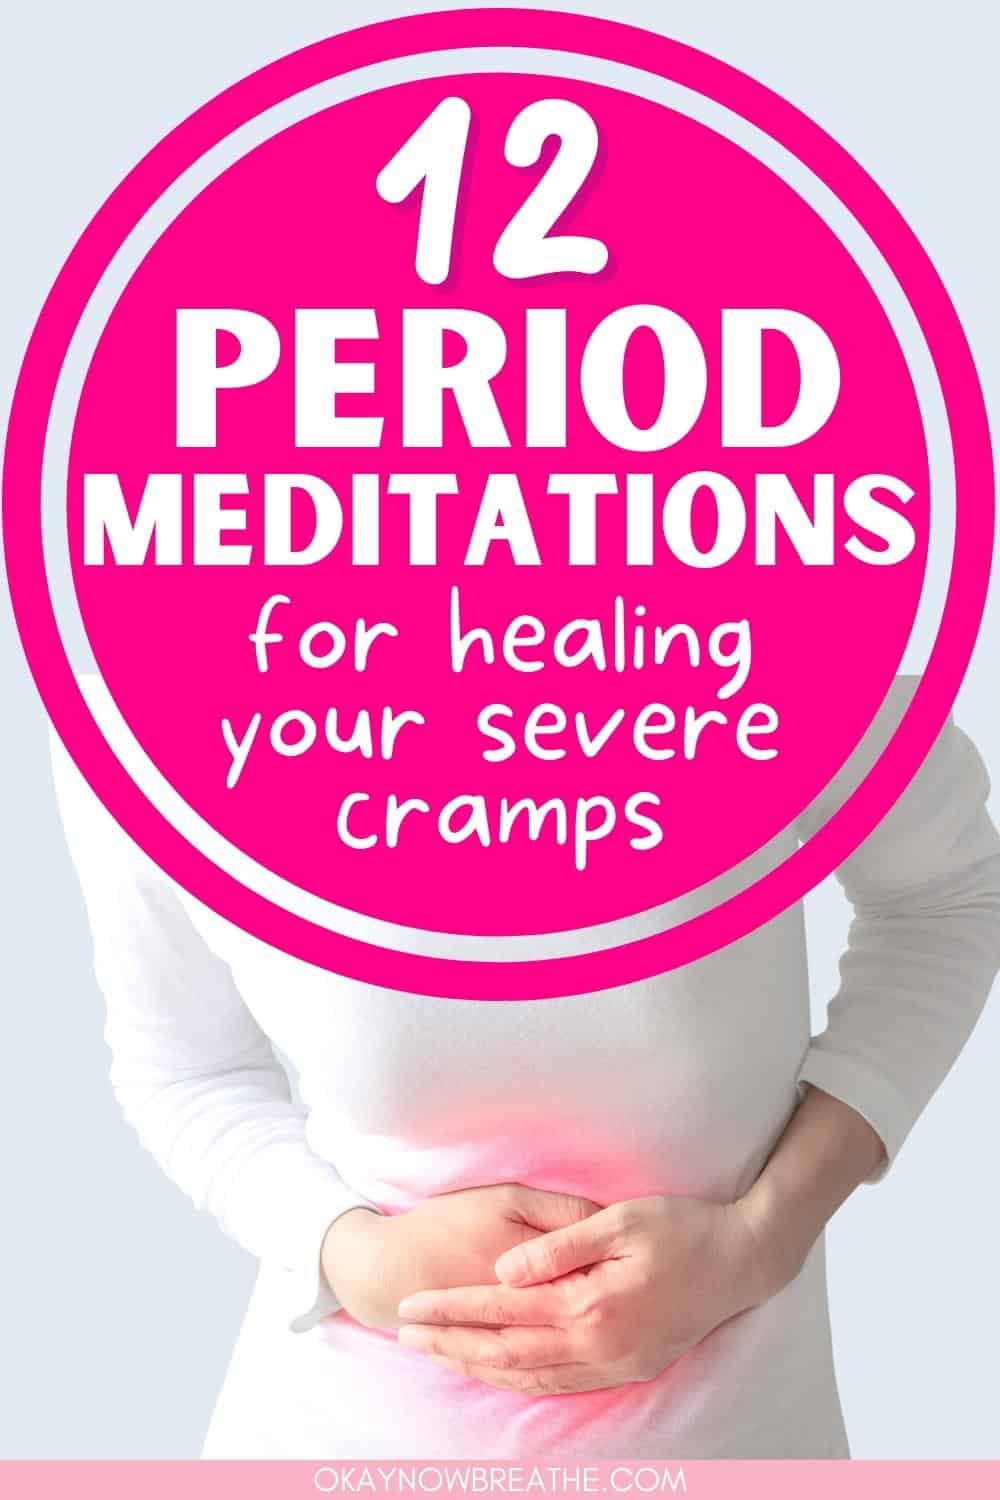 There is a white woman hovered over and holding her belly in pain. Over her head, there is a circle with text that says: 12 period meditations for healing your severe cramps.